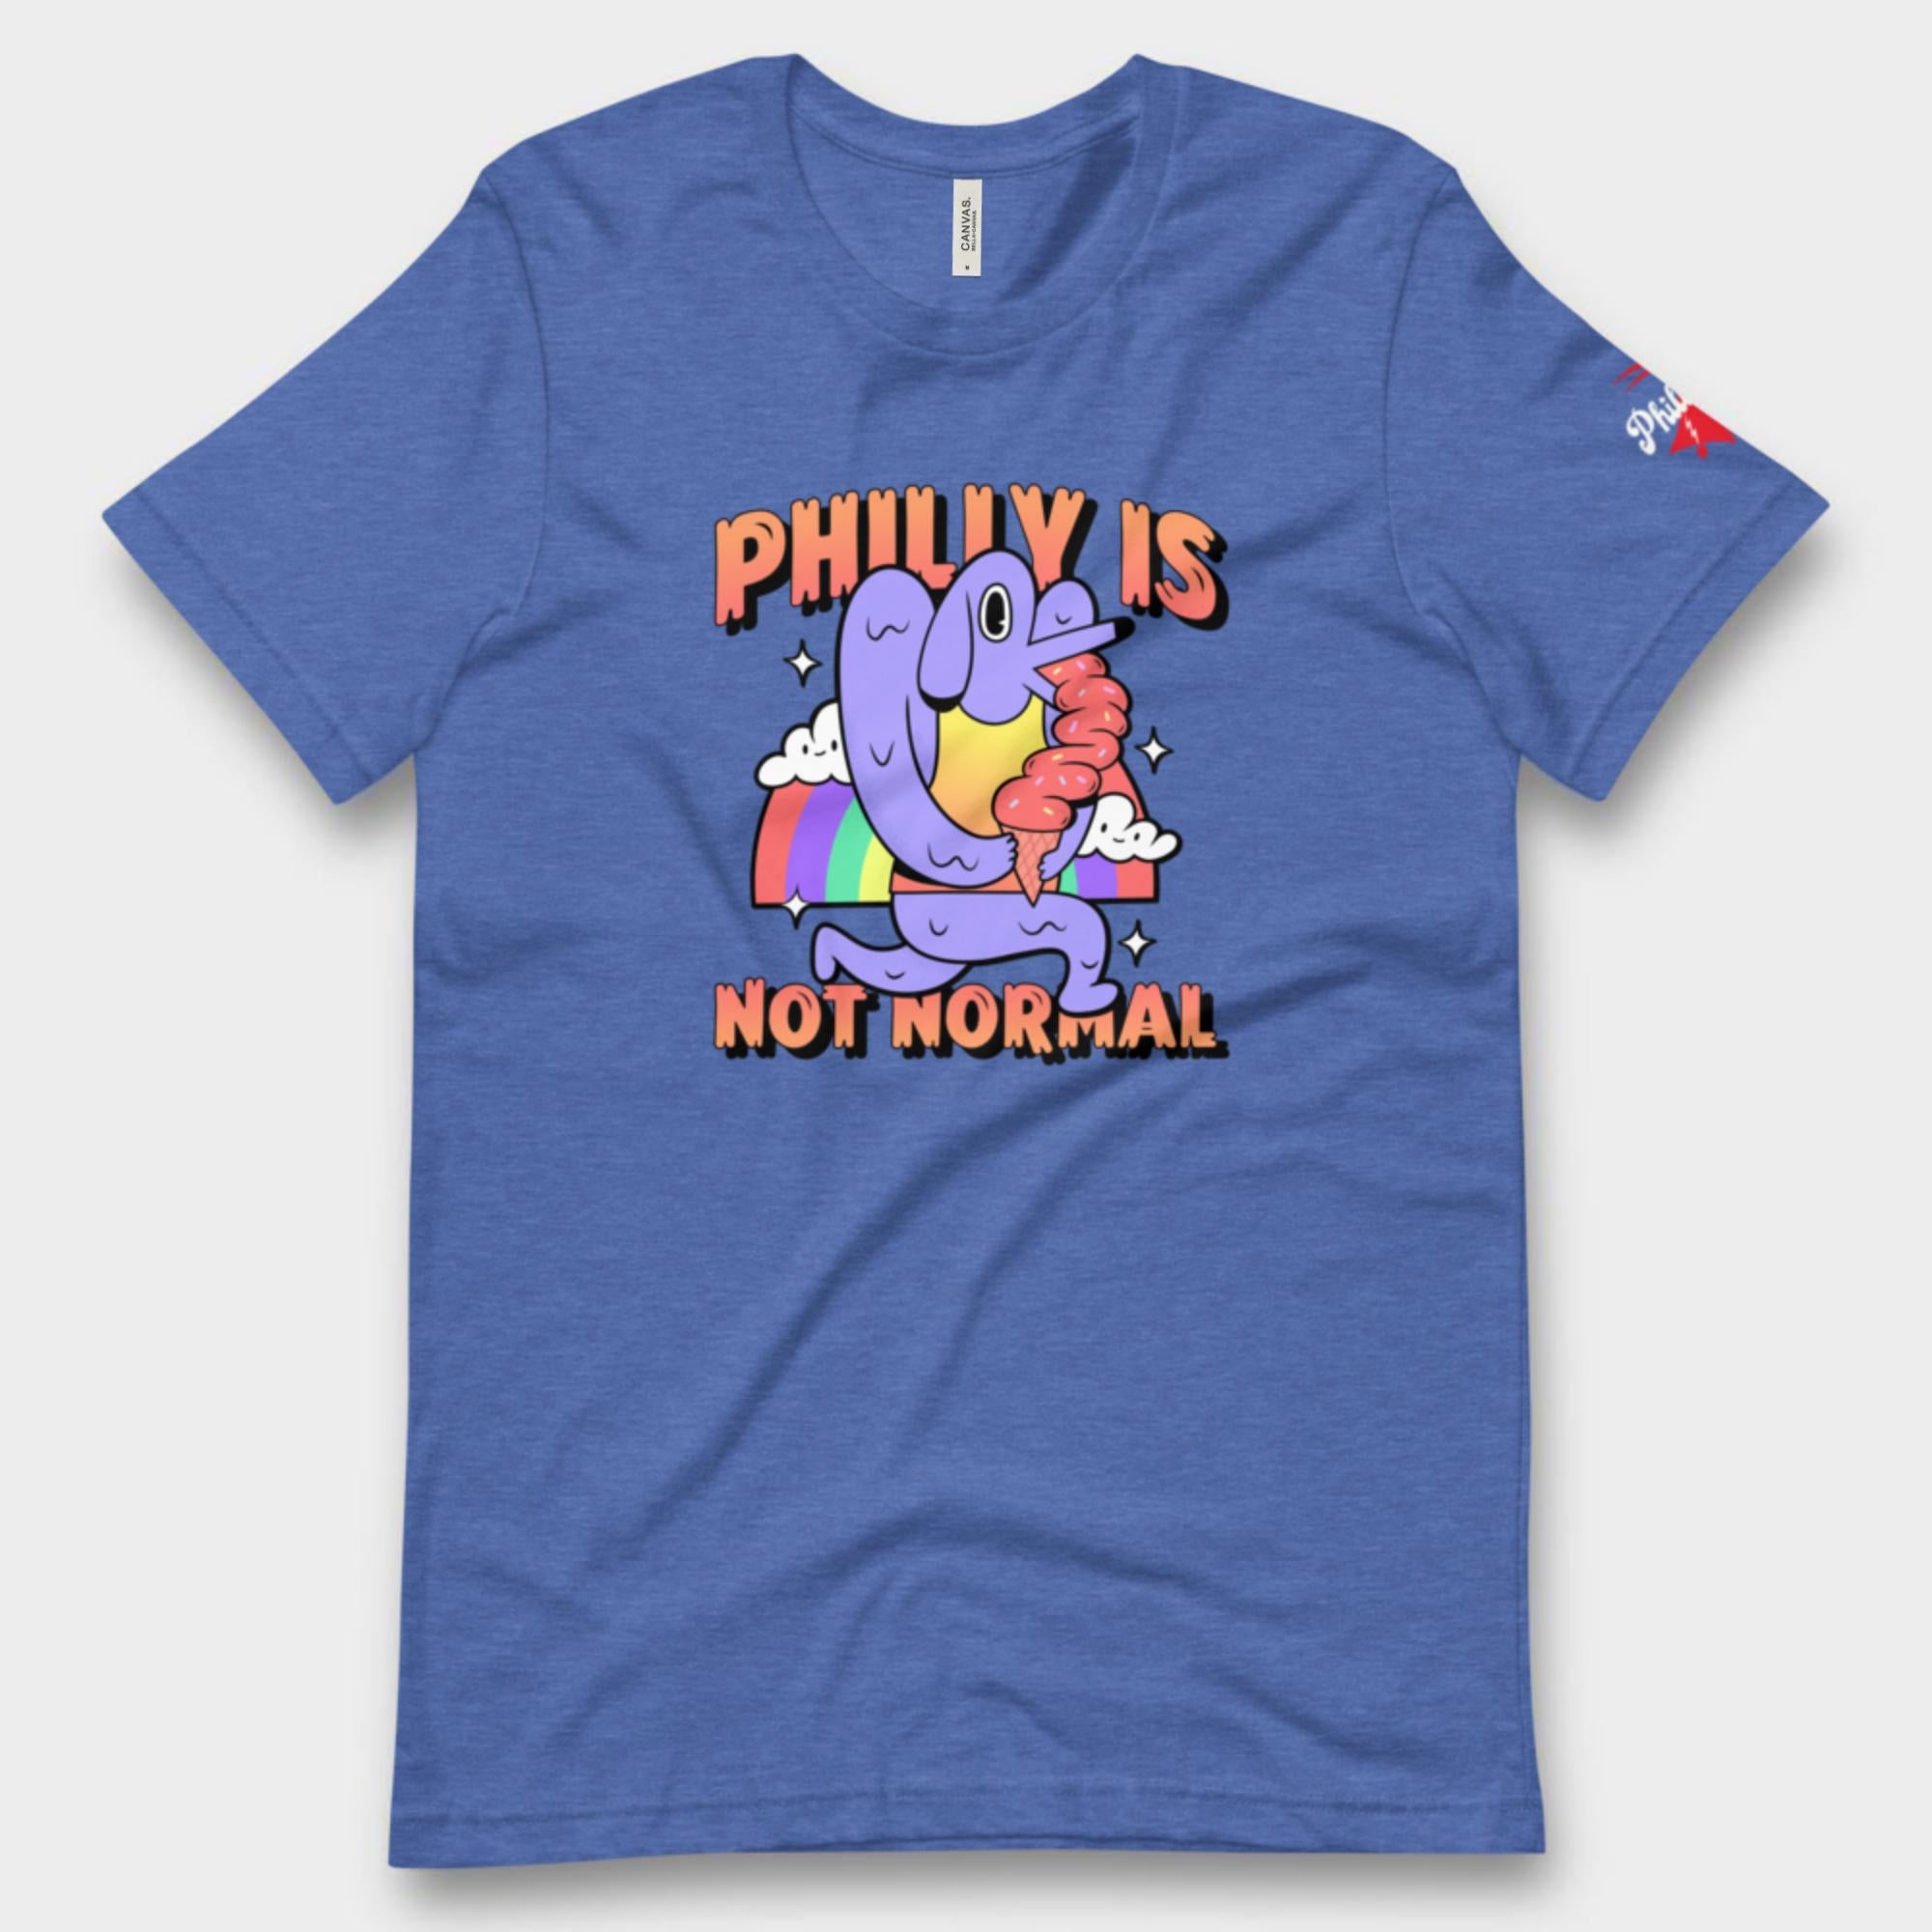 "Philly Is Not Normal" Tee